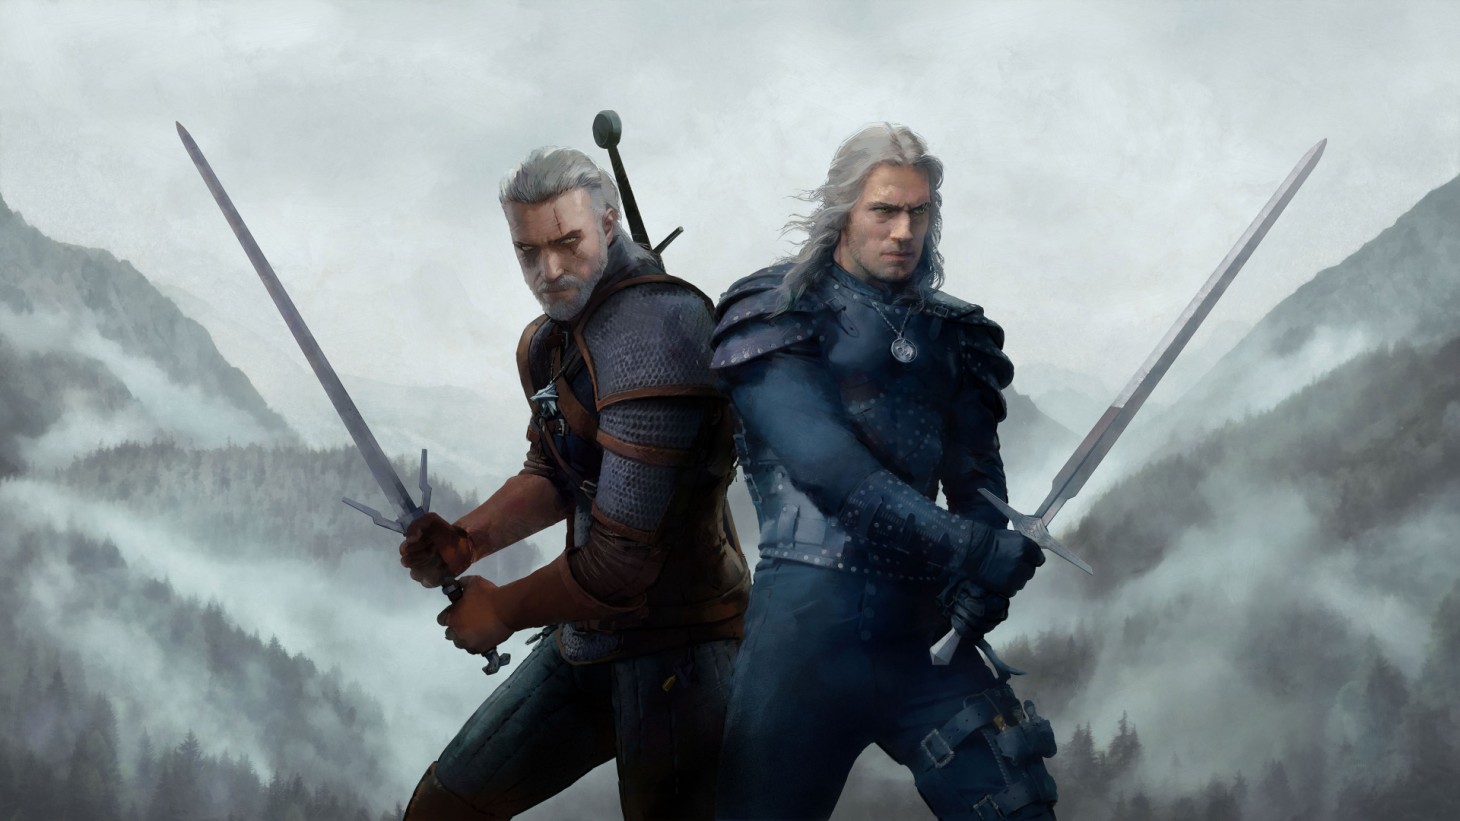 The Witcher Season 2's Biggest Differences From the Video Games